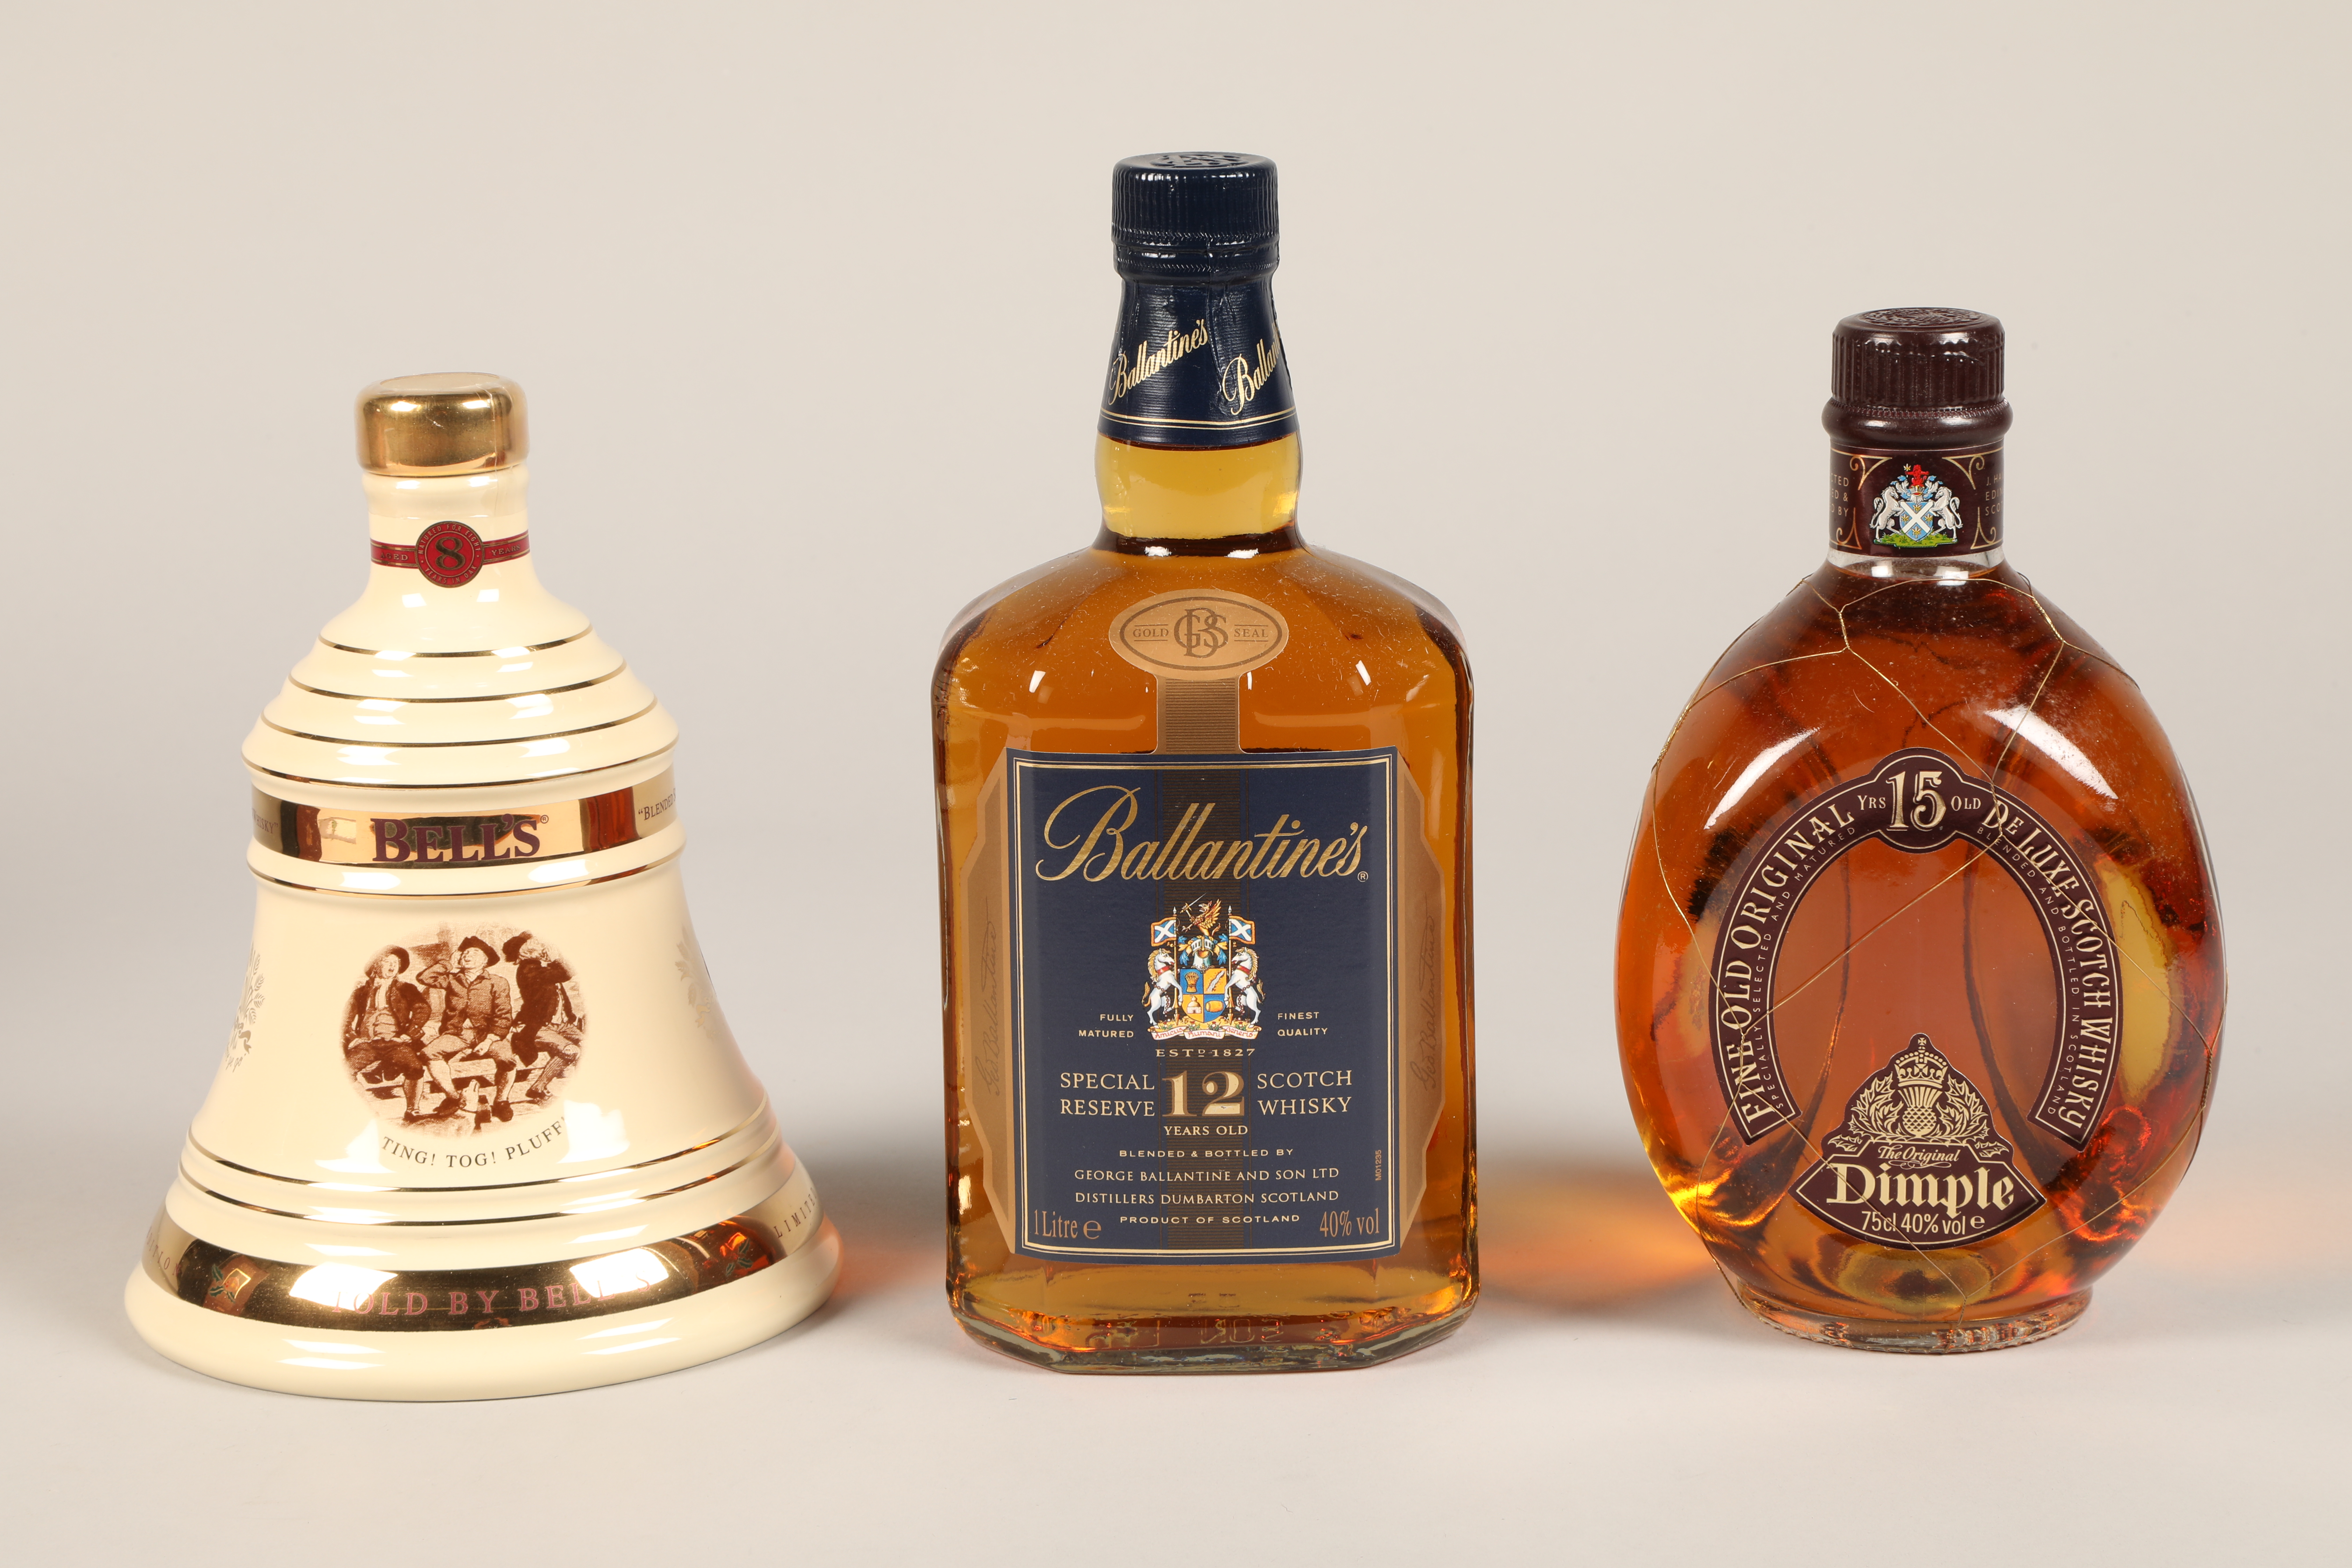 Bells blended Scotch whisky Christmas decanter 2008, 70cl, 40% vol with cardboard box Ballantines - Image 3 of 3